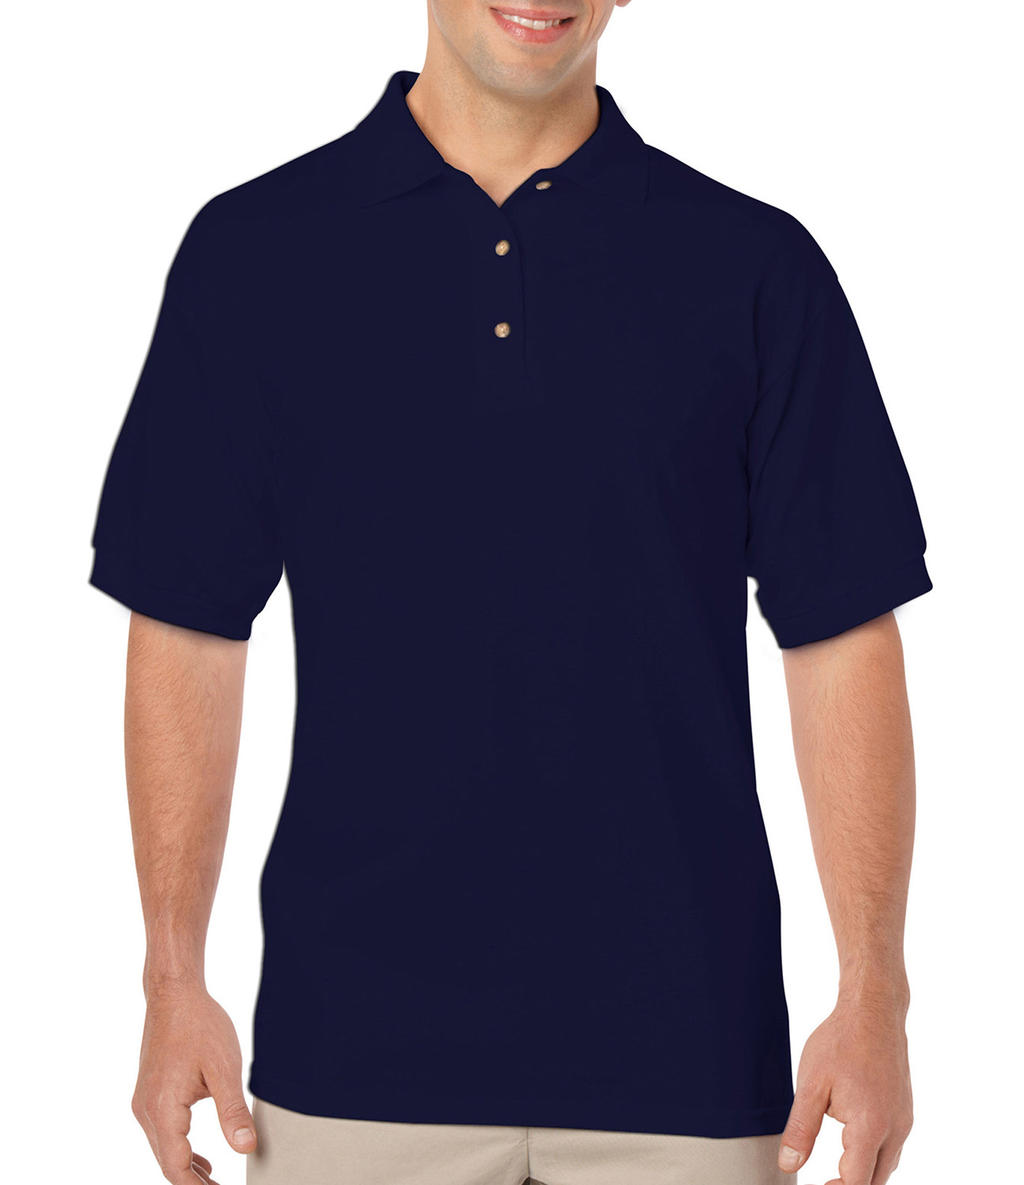  DryBlend Adult Jersey Polo in Farbe Navy